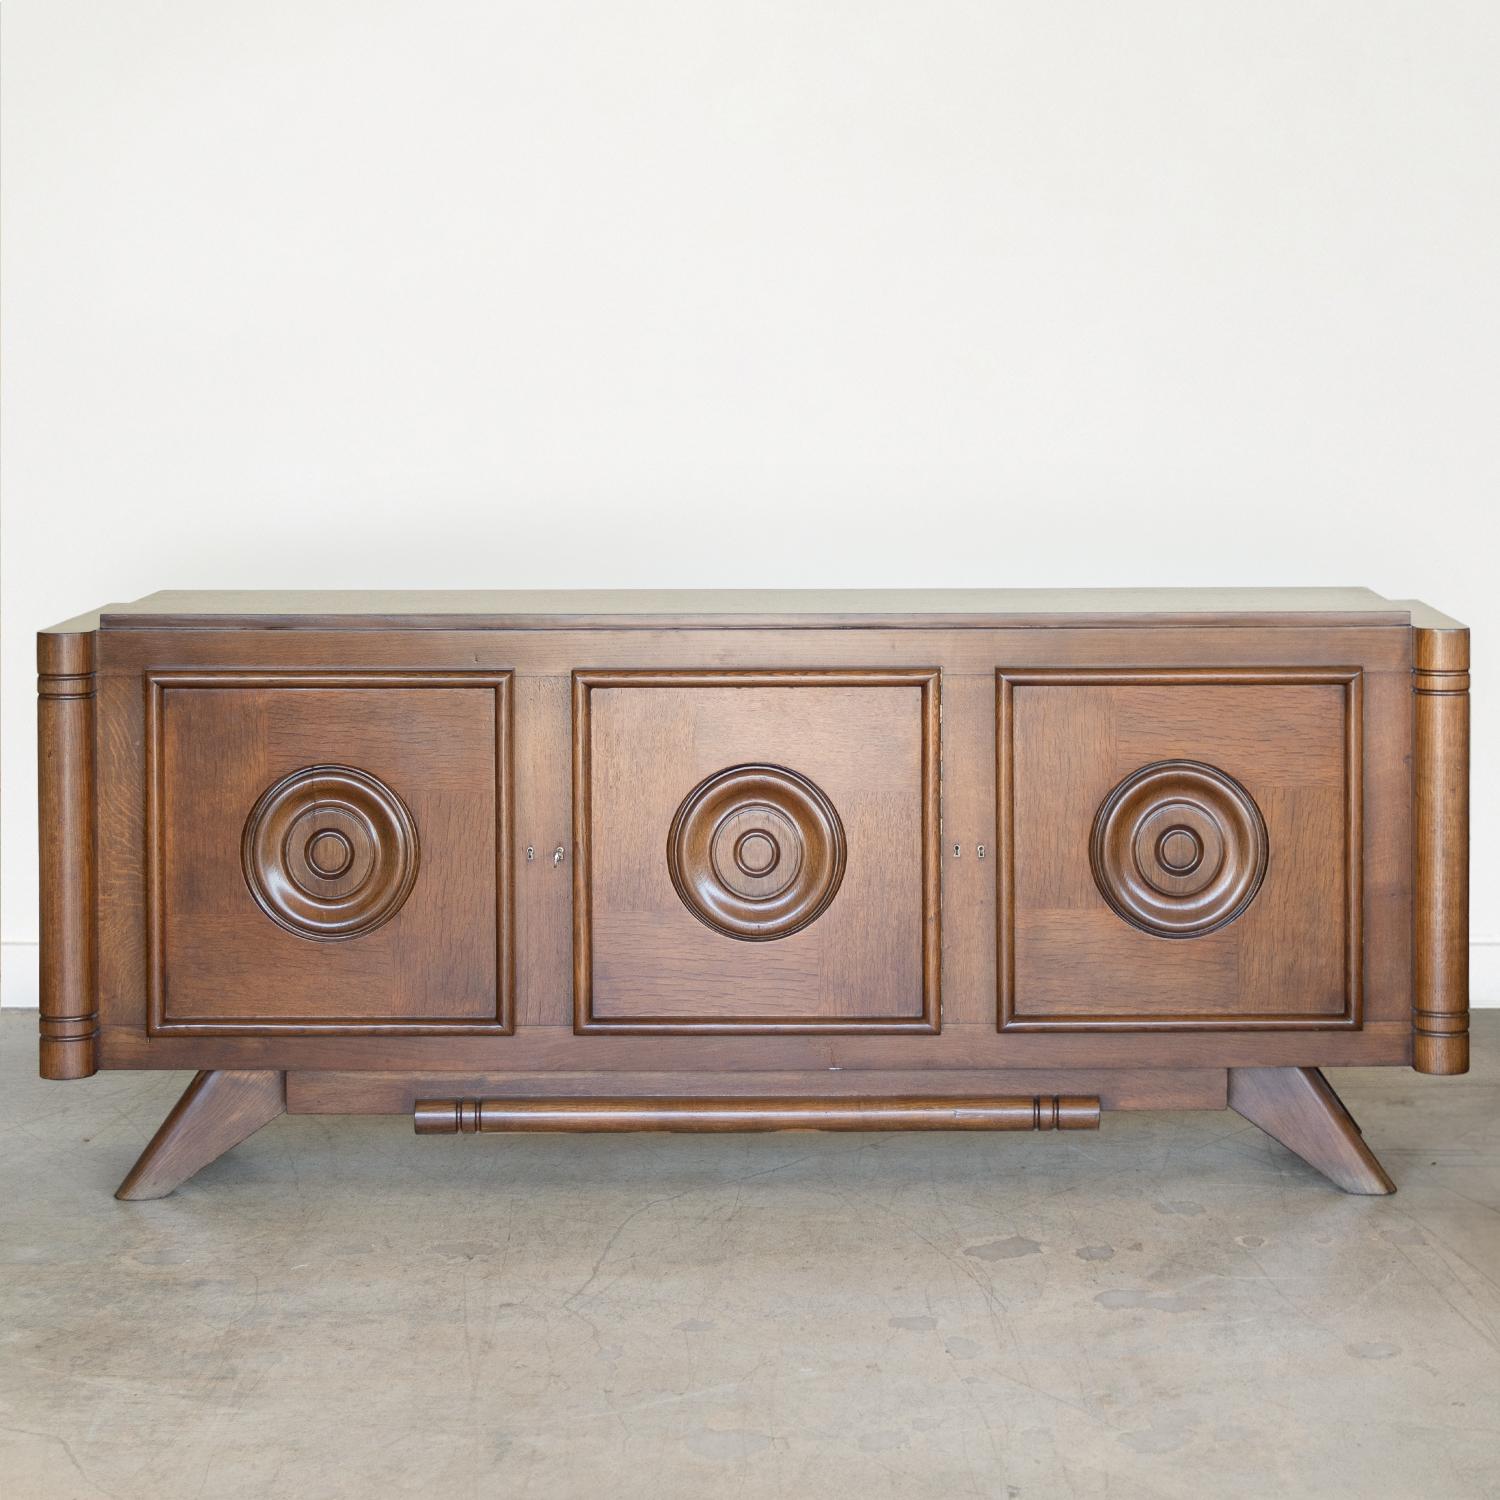 Incredible long wood sideboard by Charles Dudouyt from France, 1940's. Beautiful carved wood circles on cabinet doors and carved tapered legs. Three sections each with a middle shelf and center section with top drawer for added storage. Newly